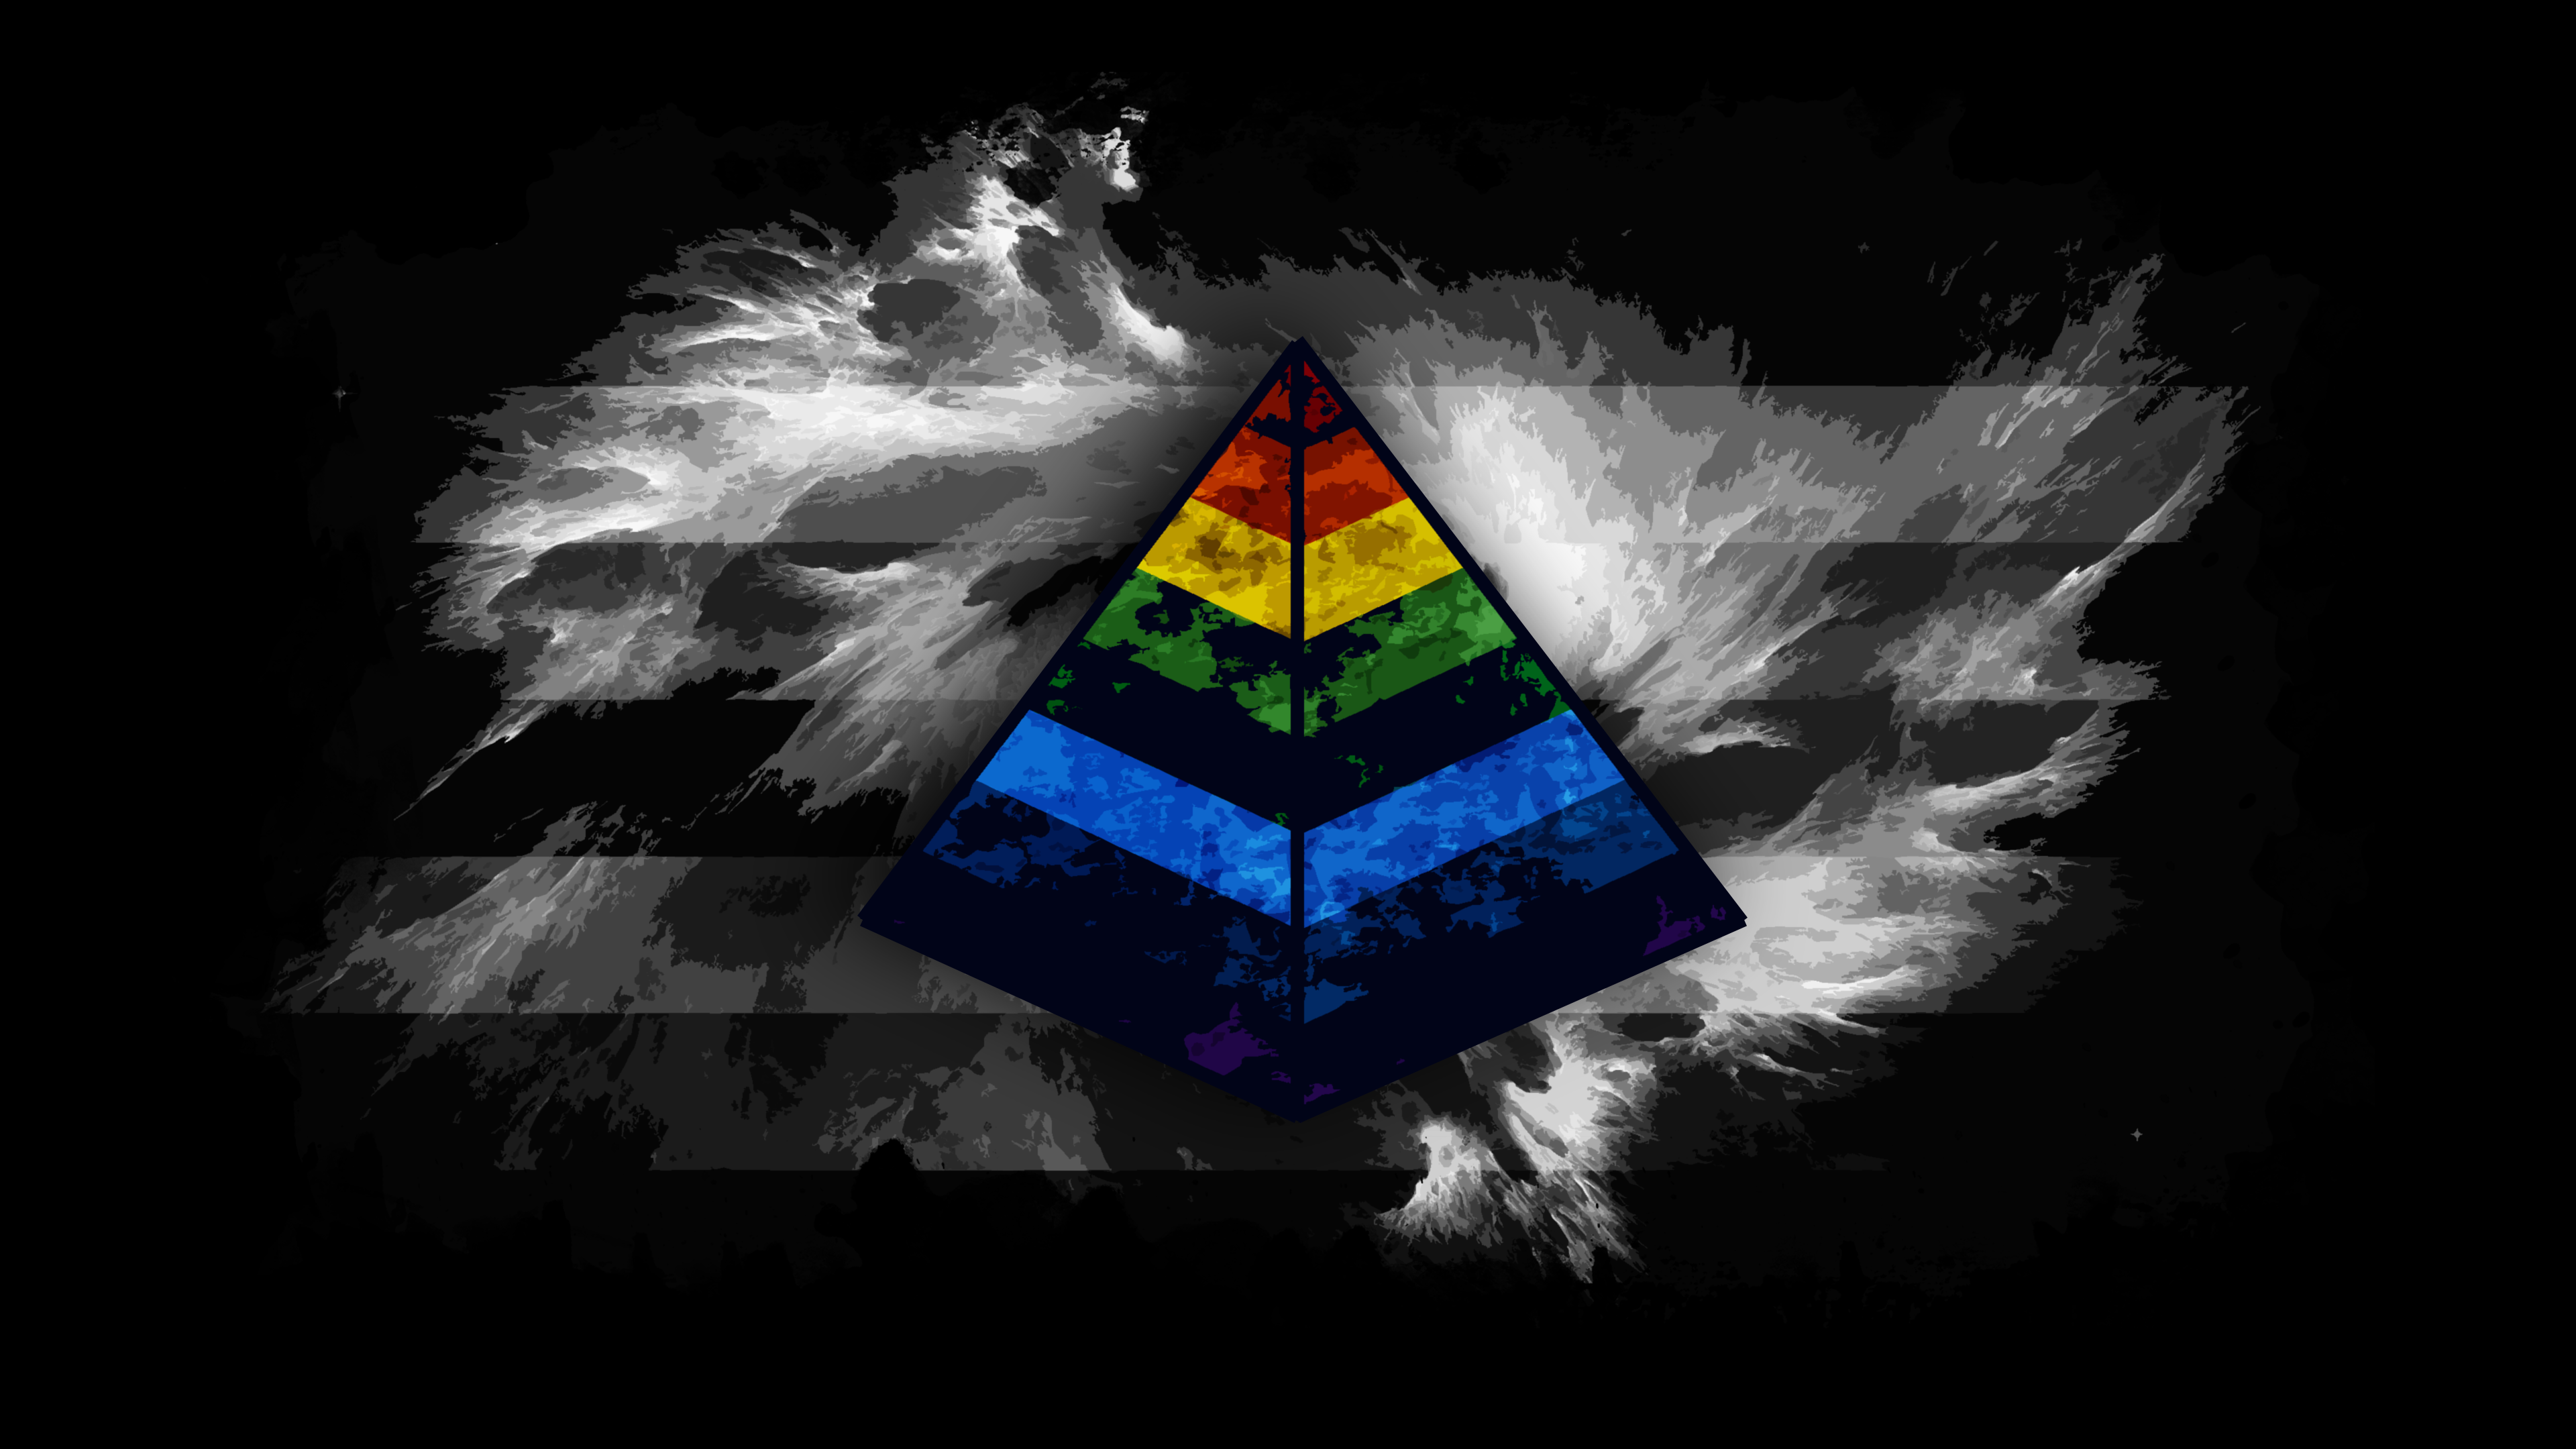 General 3840x2160 digital art selective coloring pyramid abstract geometric figures black background simple background artwork